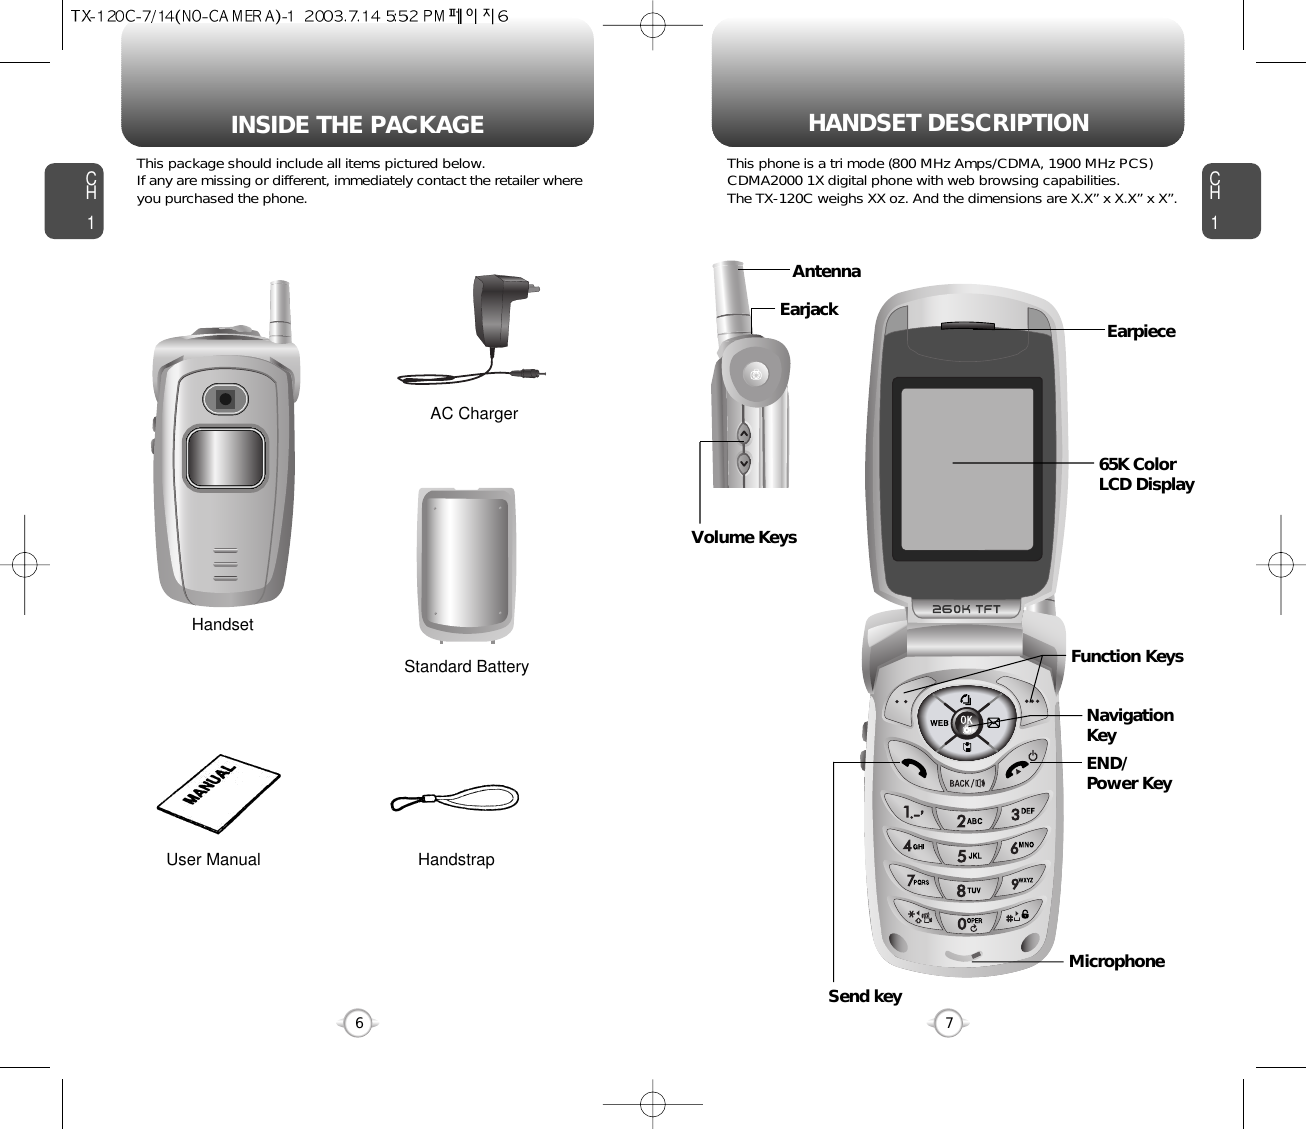 HANDSET DESCRIPTIONCH1This package should include all items pictured below. If any are missing or different, immediately contact the retailer whereyou purchased the phone.This phone is a tri mode (800 MHz Amps/CDMA, 1900 MHz PCS)CDMA2000 1X digital phone with web browsing capabilities.  The TX-120C weighs XX oz. And the dimensions are X.X” x X.X” x X”.7INSIDE THE PACKAGECH16HandstrapUser ManualAC ChargerHandsetStandard BatteryAntennaEarjackVolume Keys65K ColorLCD DisplayFunction KeysSend keyEND/Power KeyMicrophoneEarpieceNavigationKey